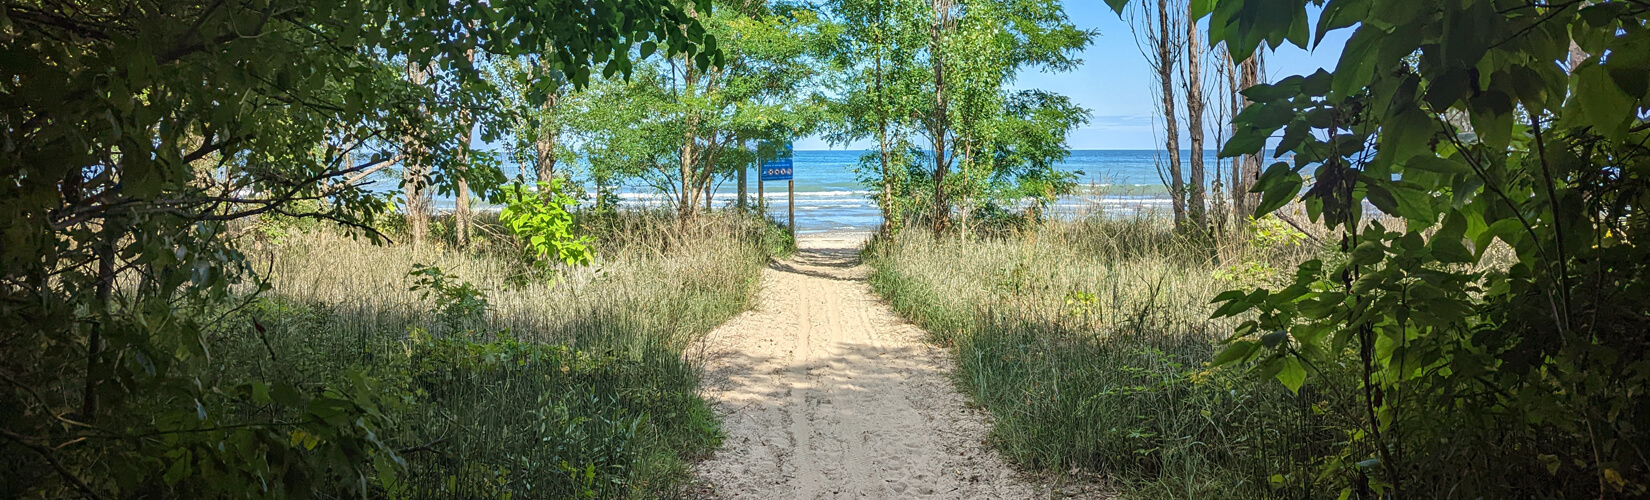 Rondeau Provincial Park: Camping, Hiking & More Near Lake Erie :: I've Been Bit! Travel Blog